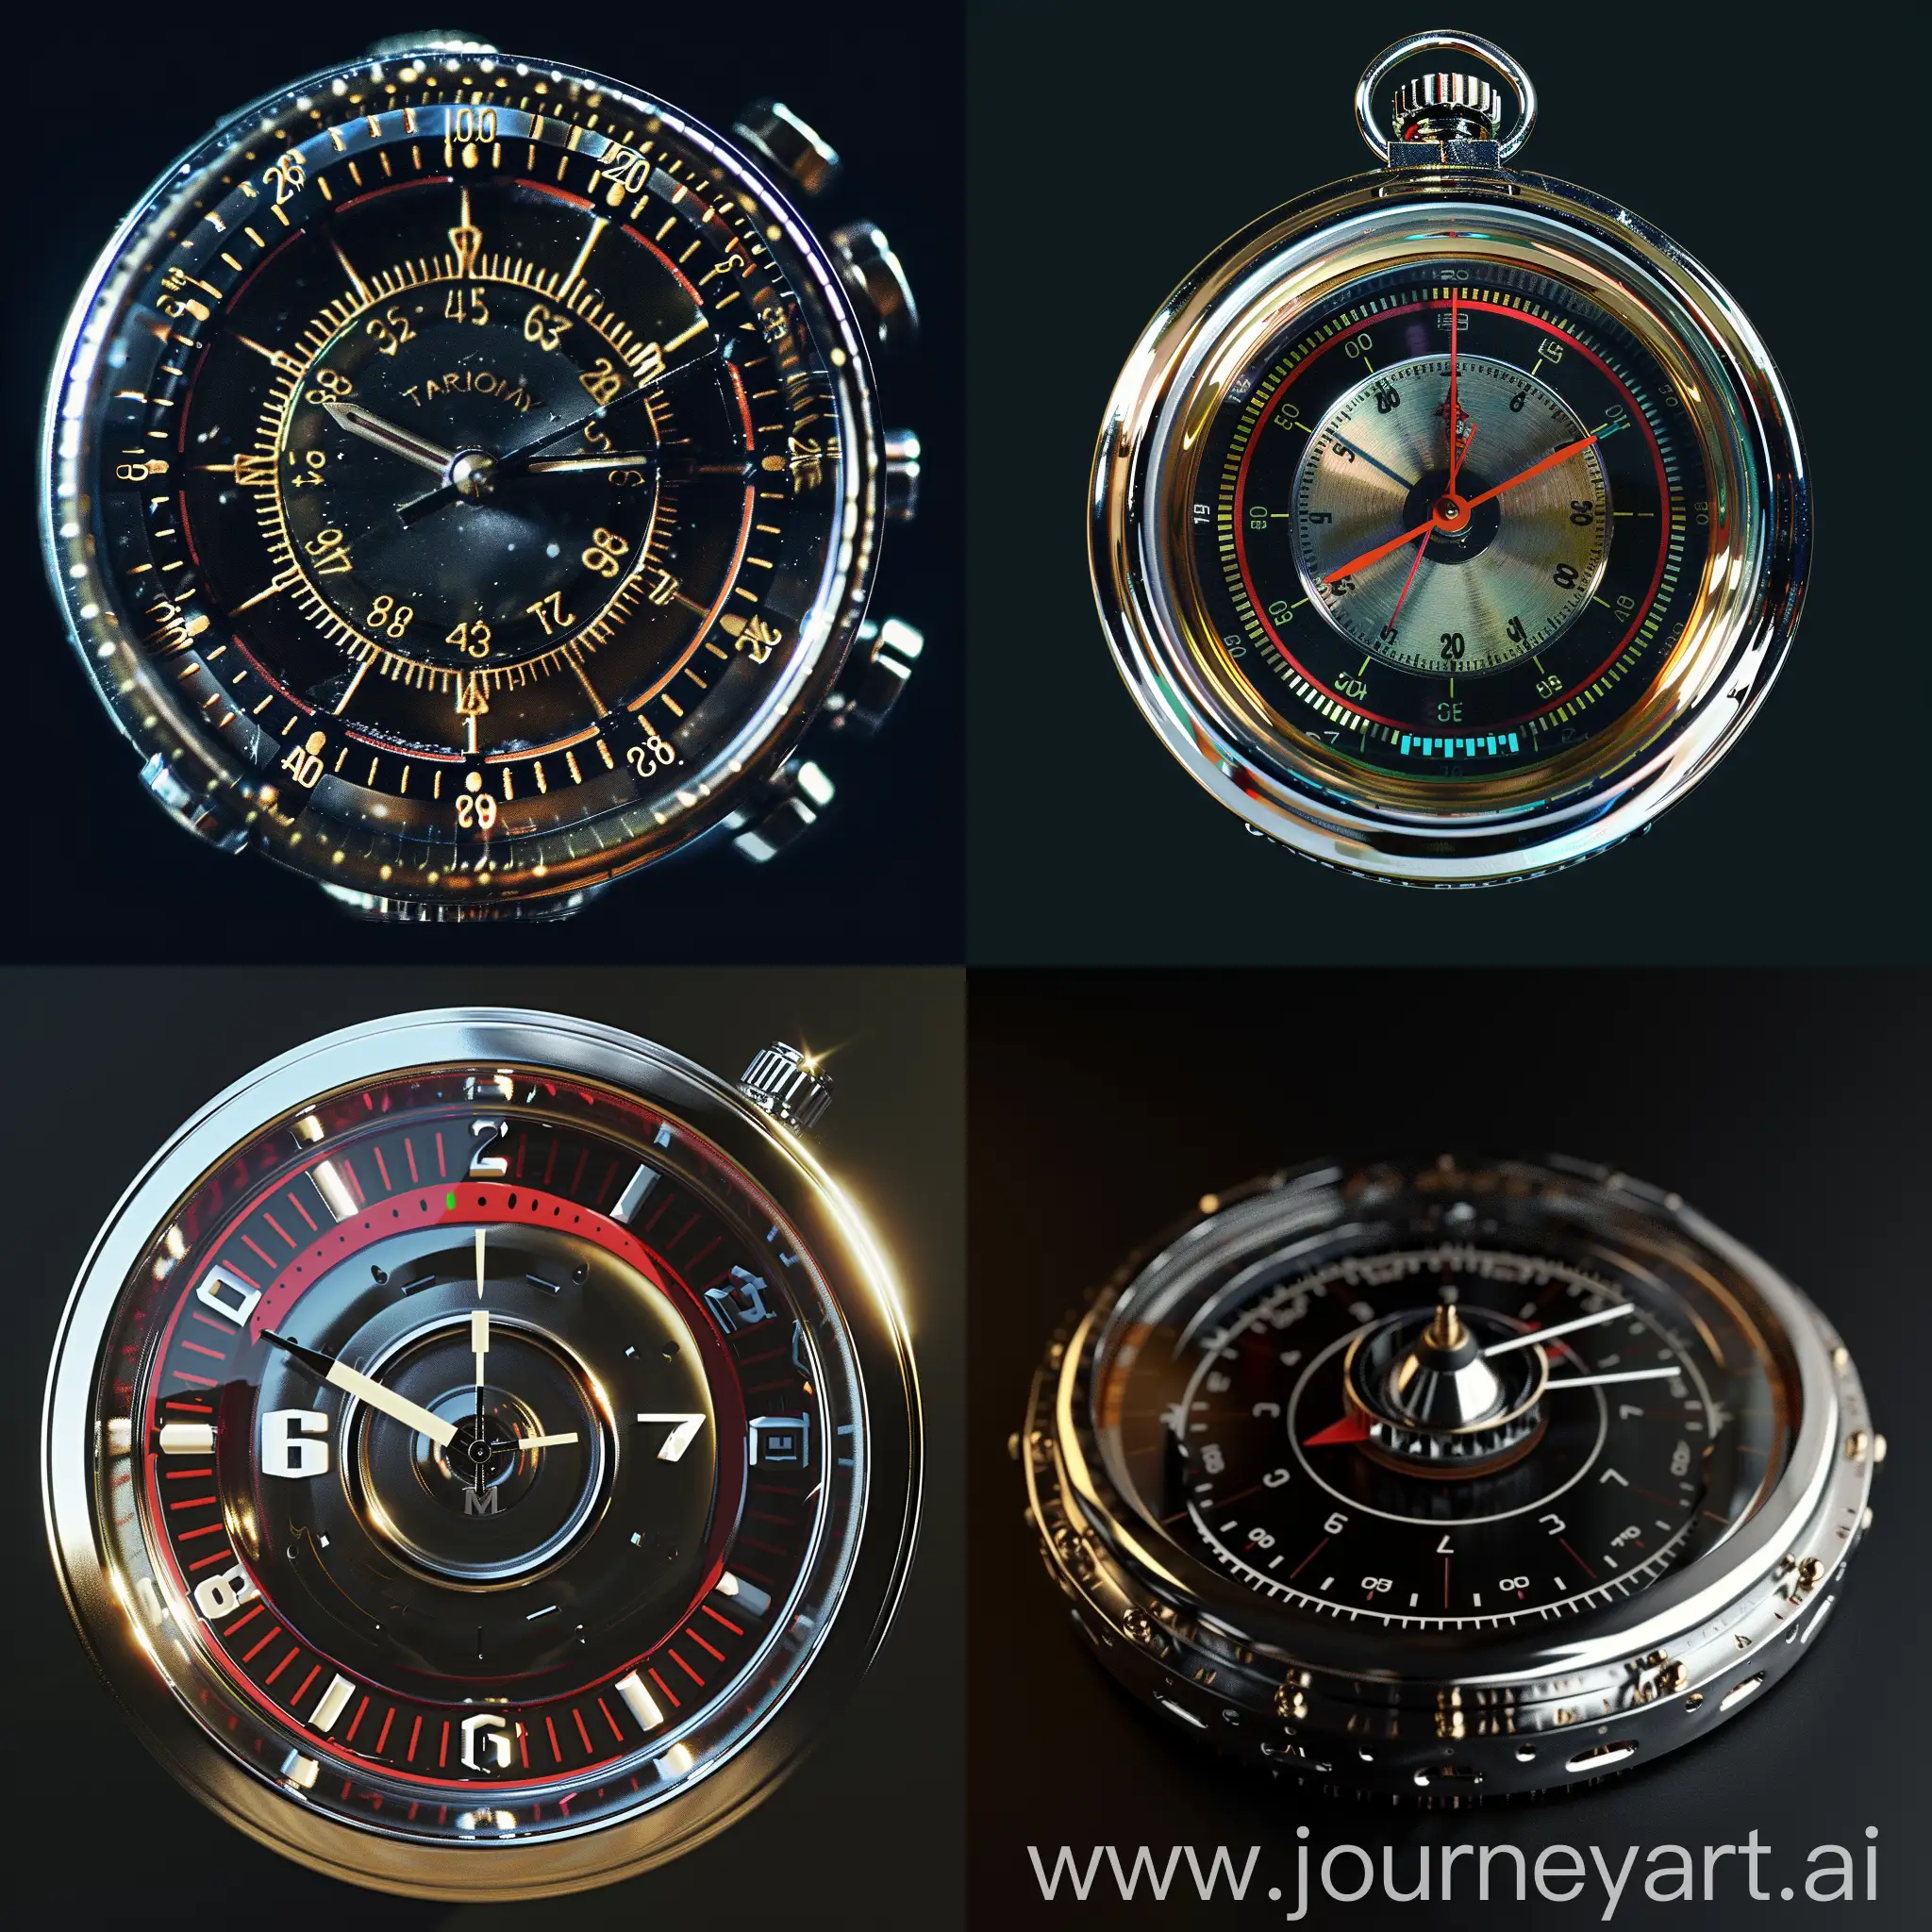 Sleek-Tachymeter-with-Digital-Display-for-Precision-Timing